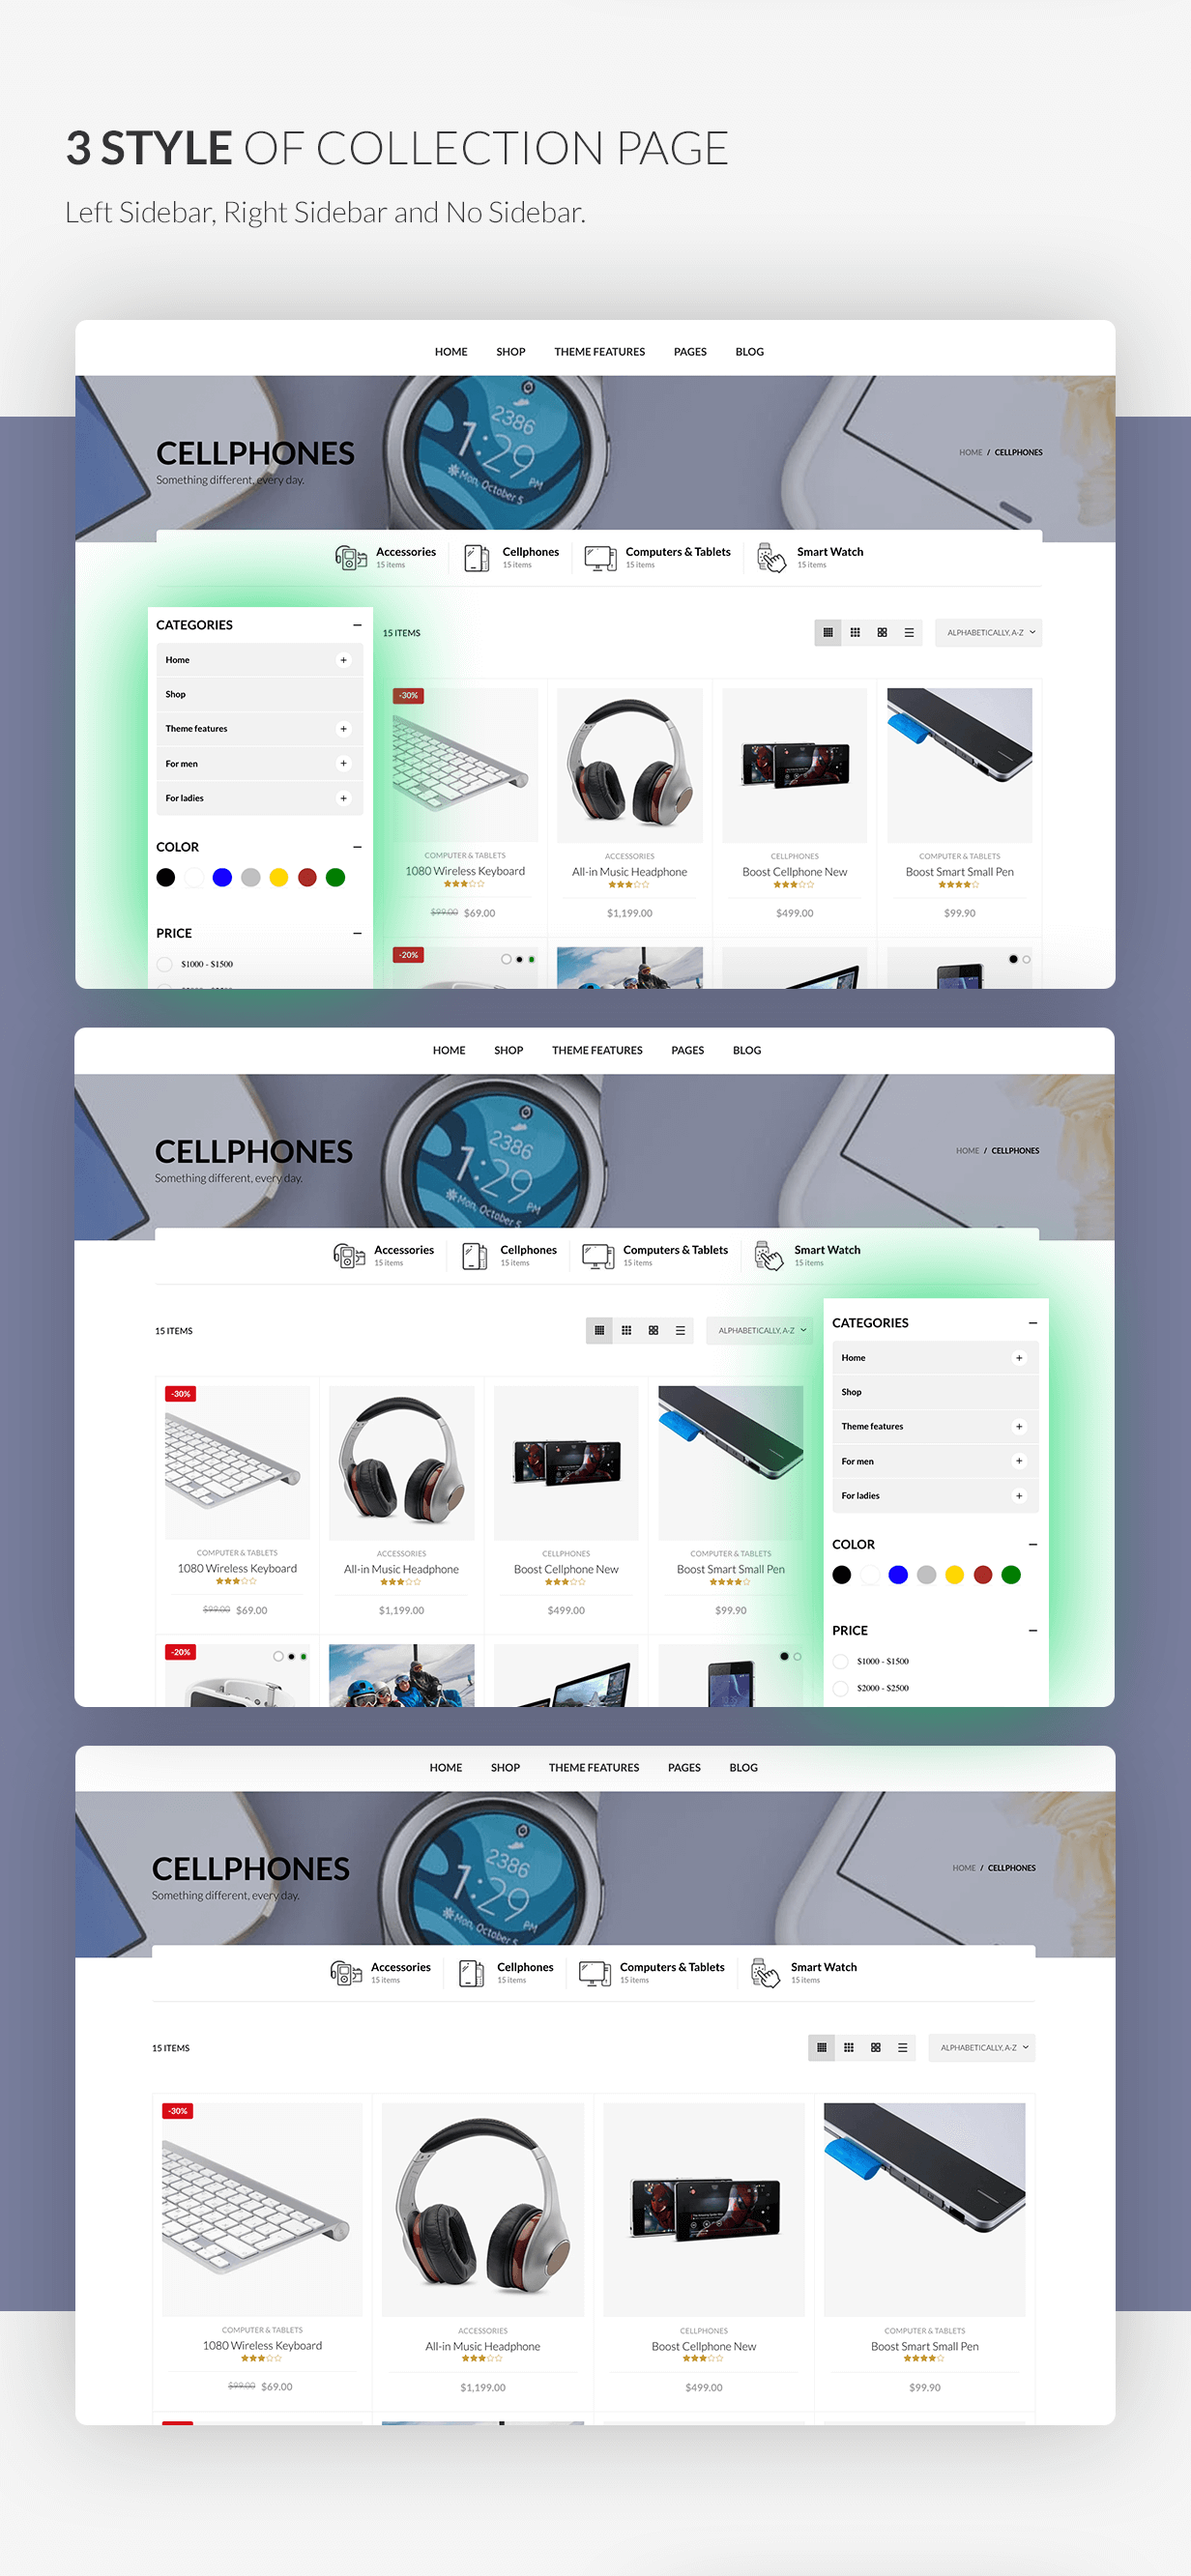 3 styles of collection page